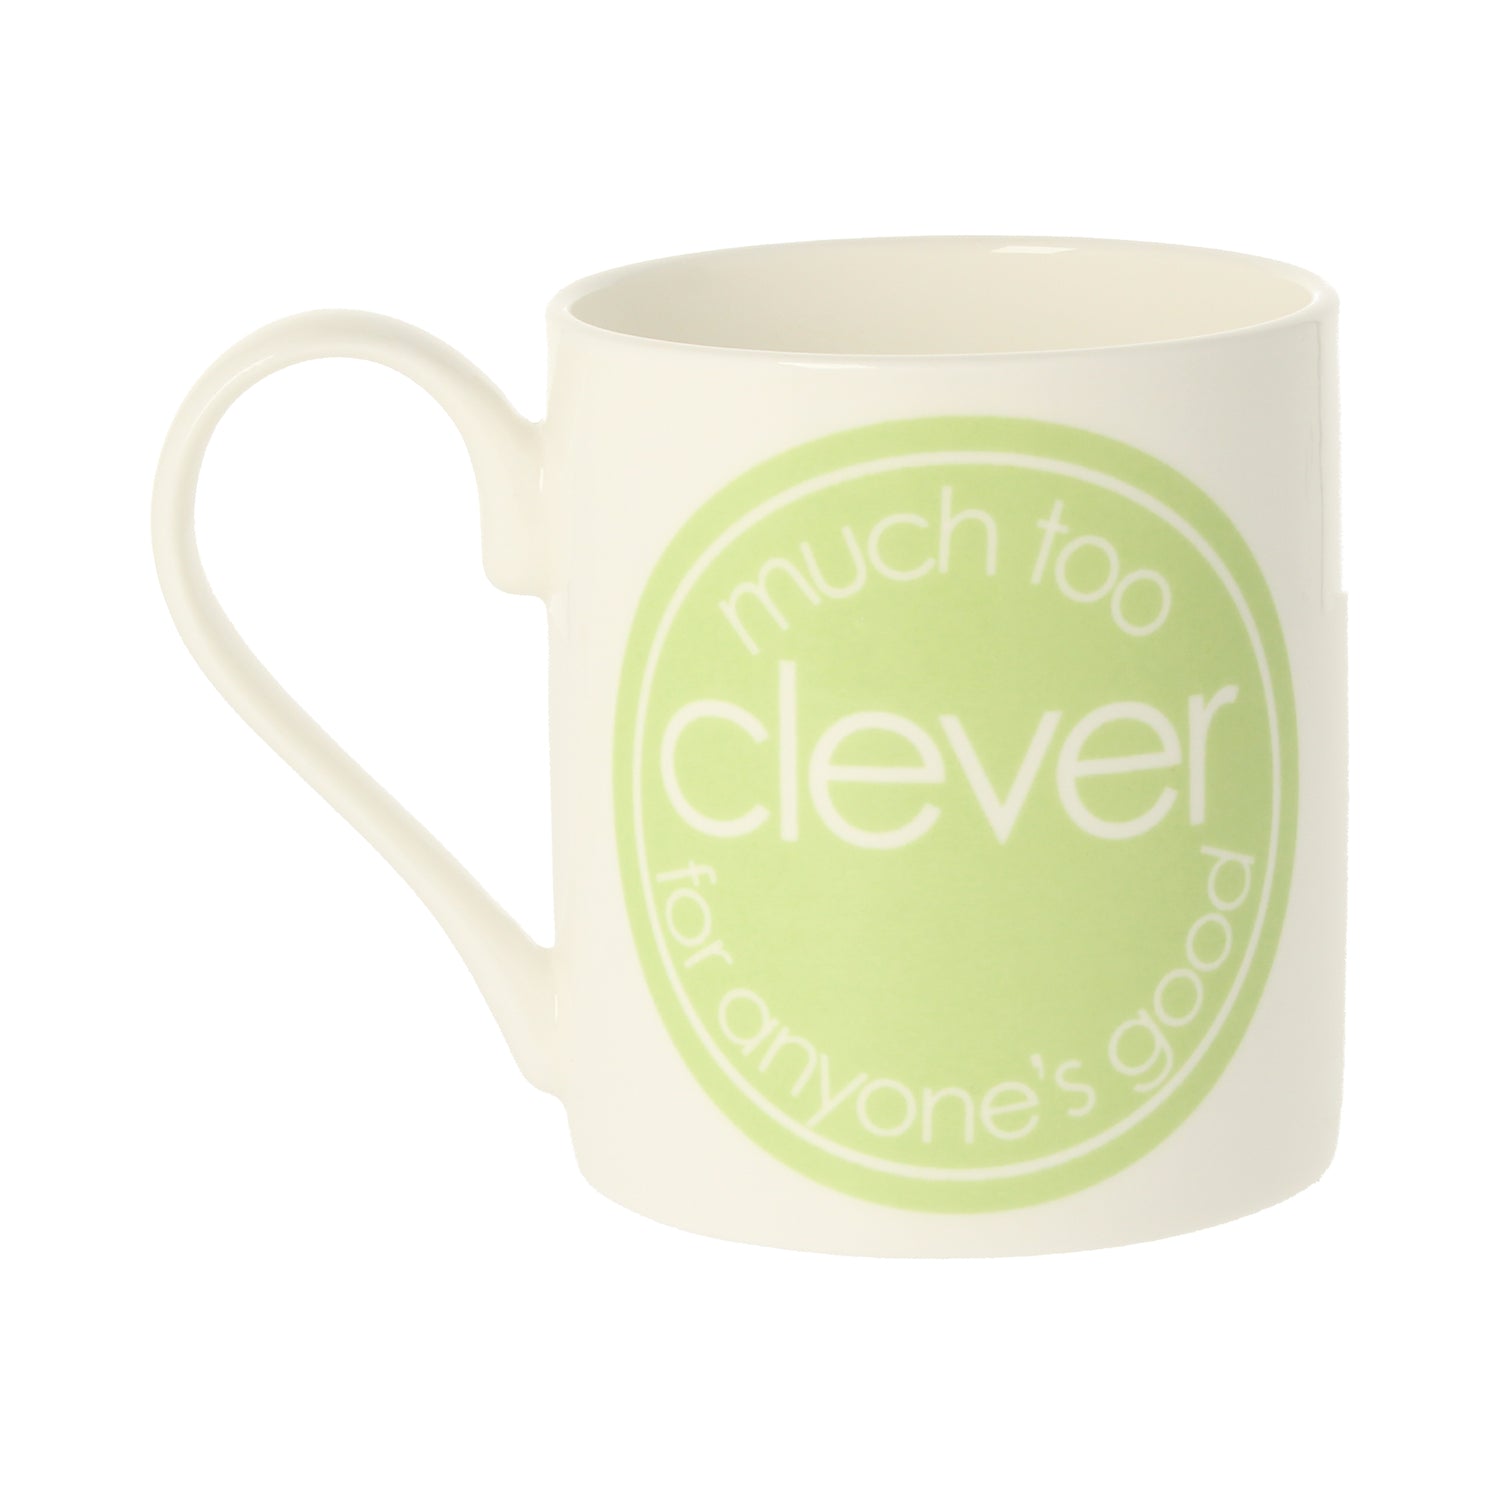 Much Too Clever Mug